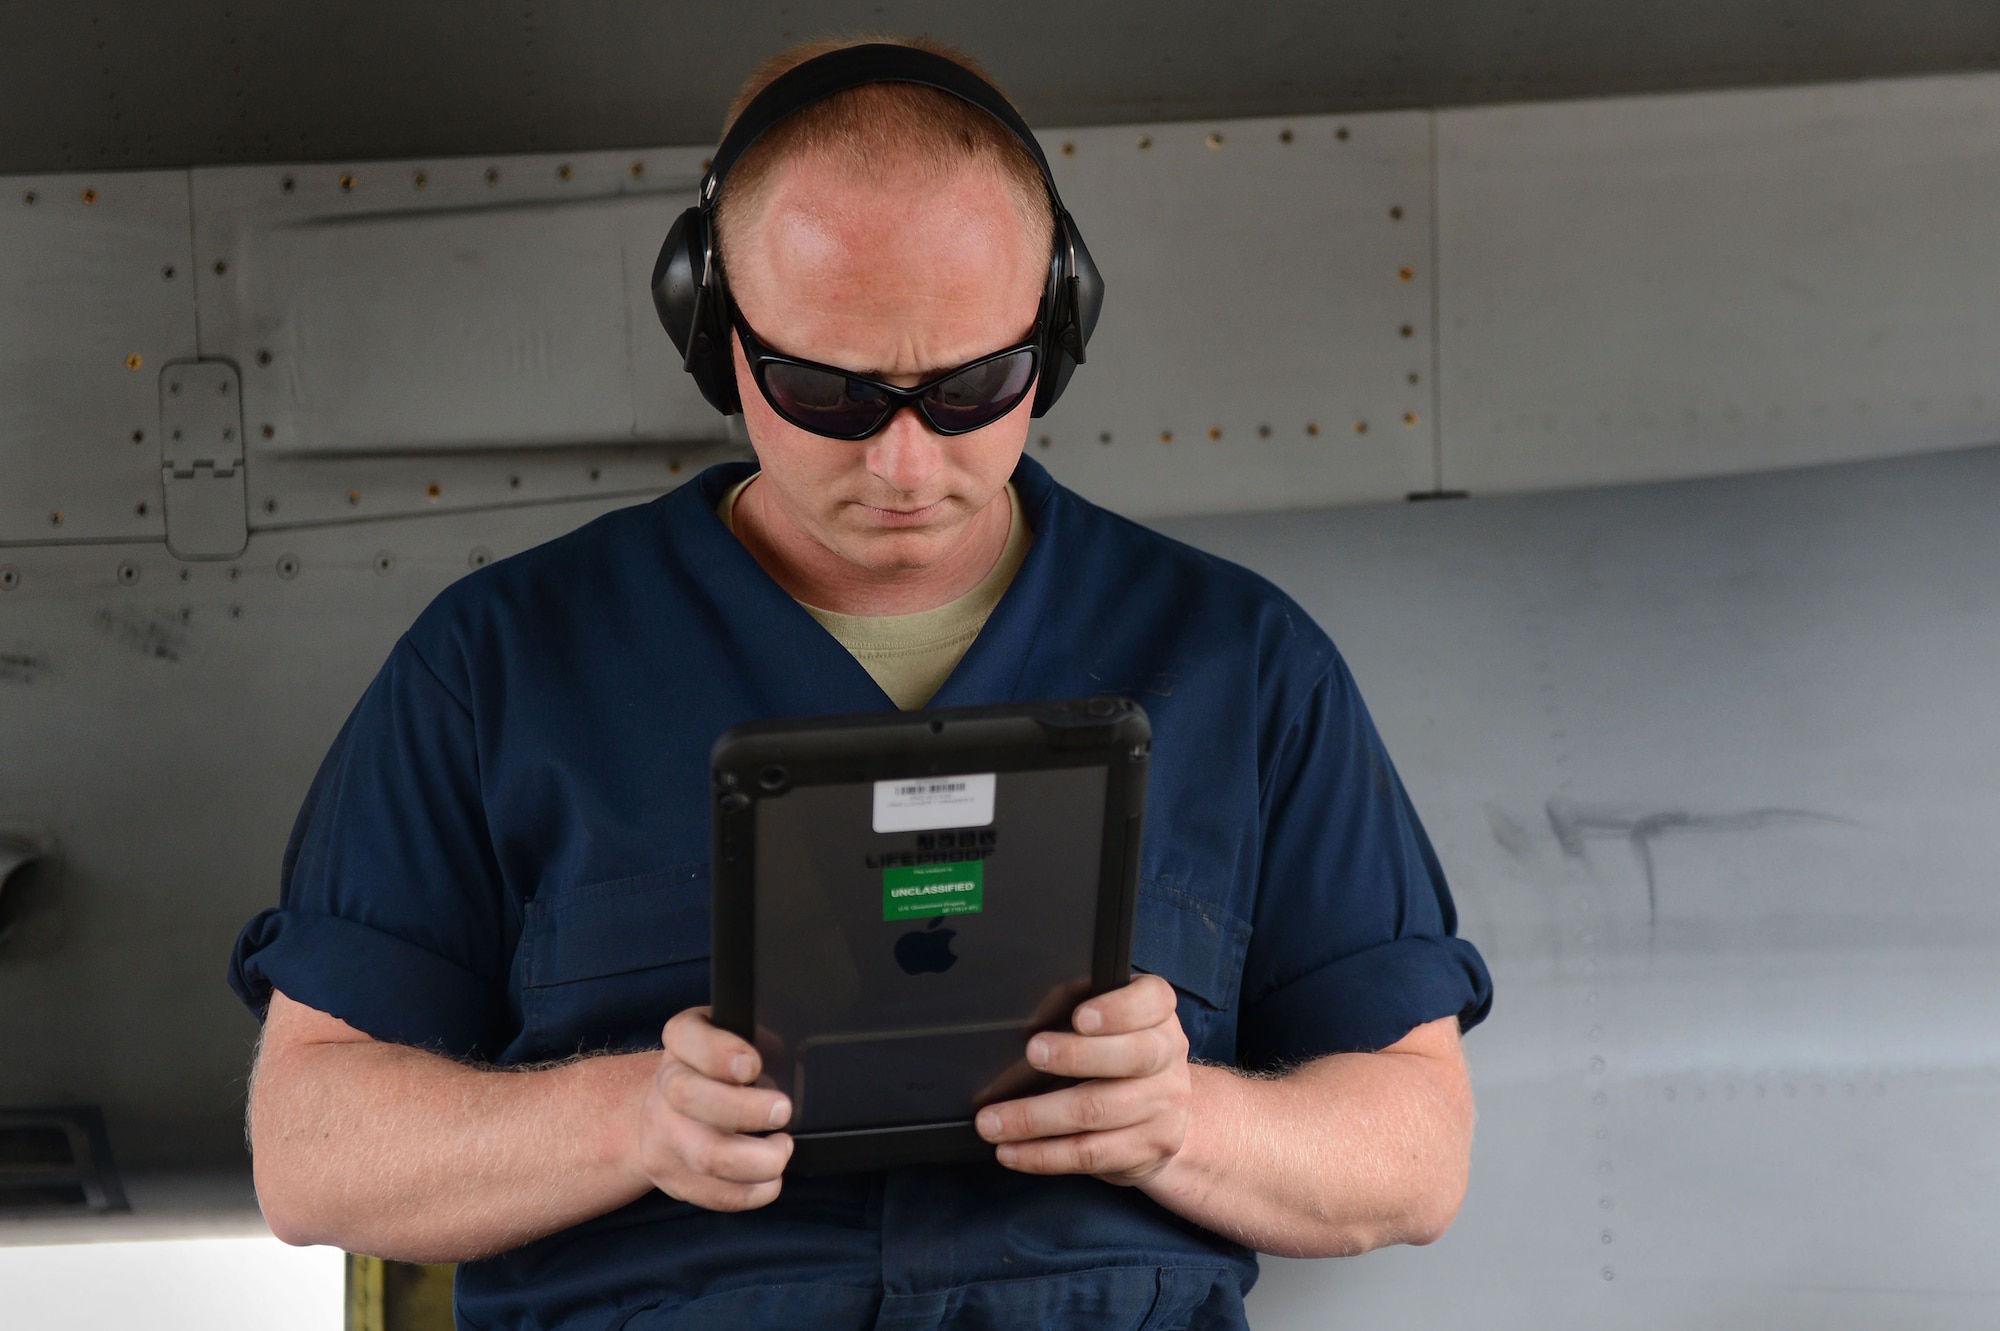 Senior Airman Matthew Leke, 20th Aircraft Maintenance Squadron, 55th Aircraft Maintenance Unit tactical aircraft maintainer, navigates an iPad version of a technical order manual instead of an older electronic version at Shaw Air Force Base, S.C., April 29, 2014.  The 55th AMU tested the iPads’ reliability on the flight line. (U.S. Air Force photo by Airman 1st Class Jensen Stidham/Released)